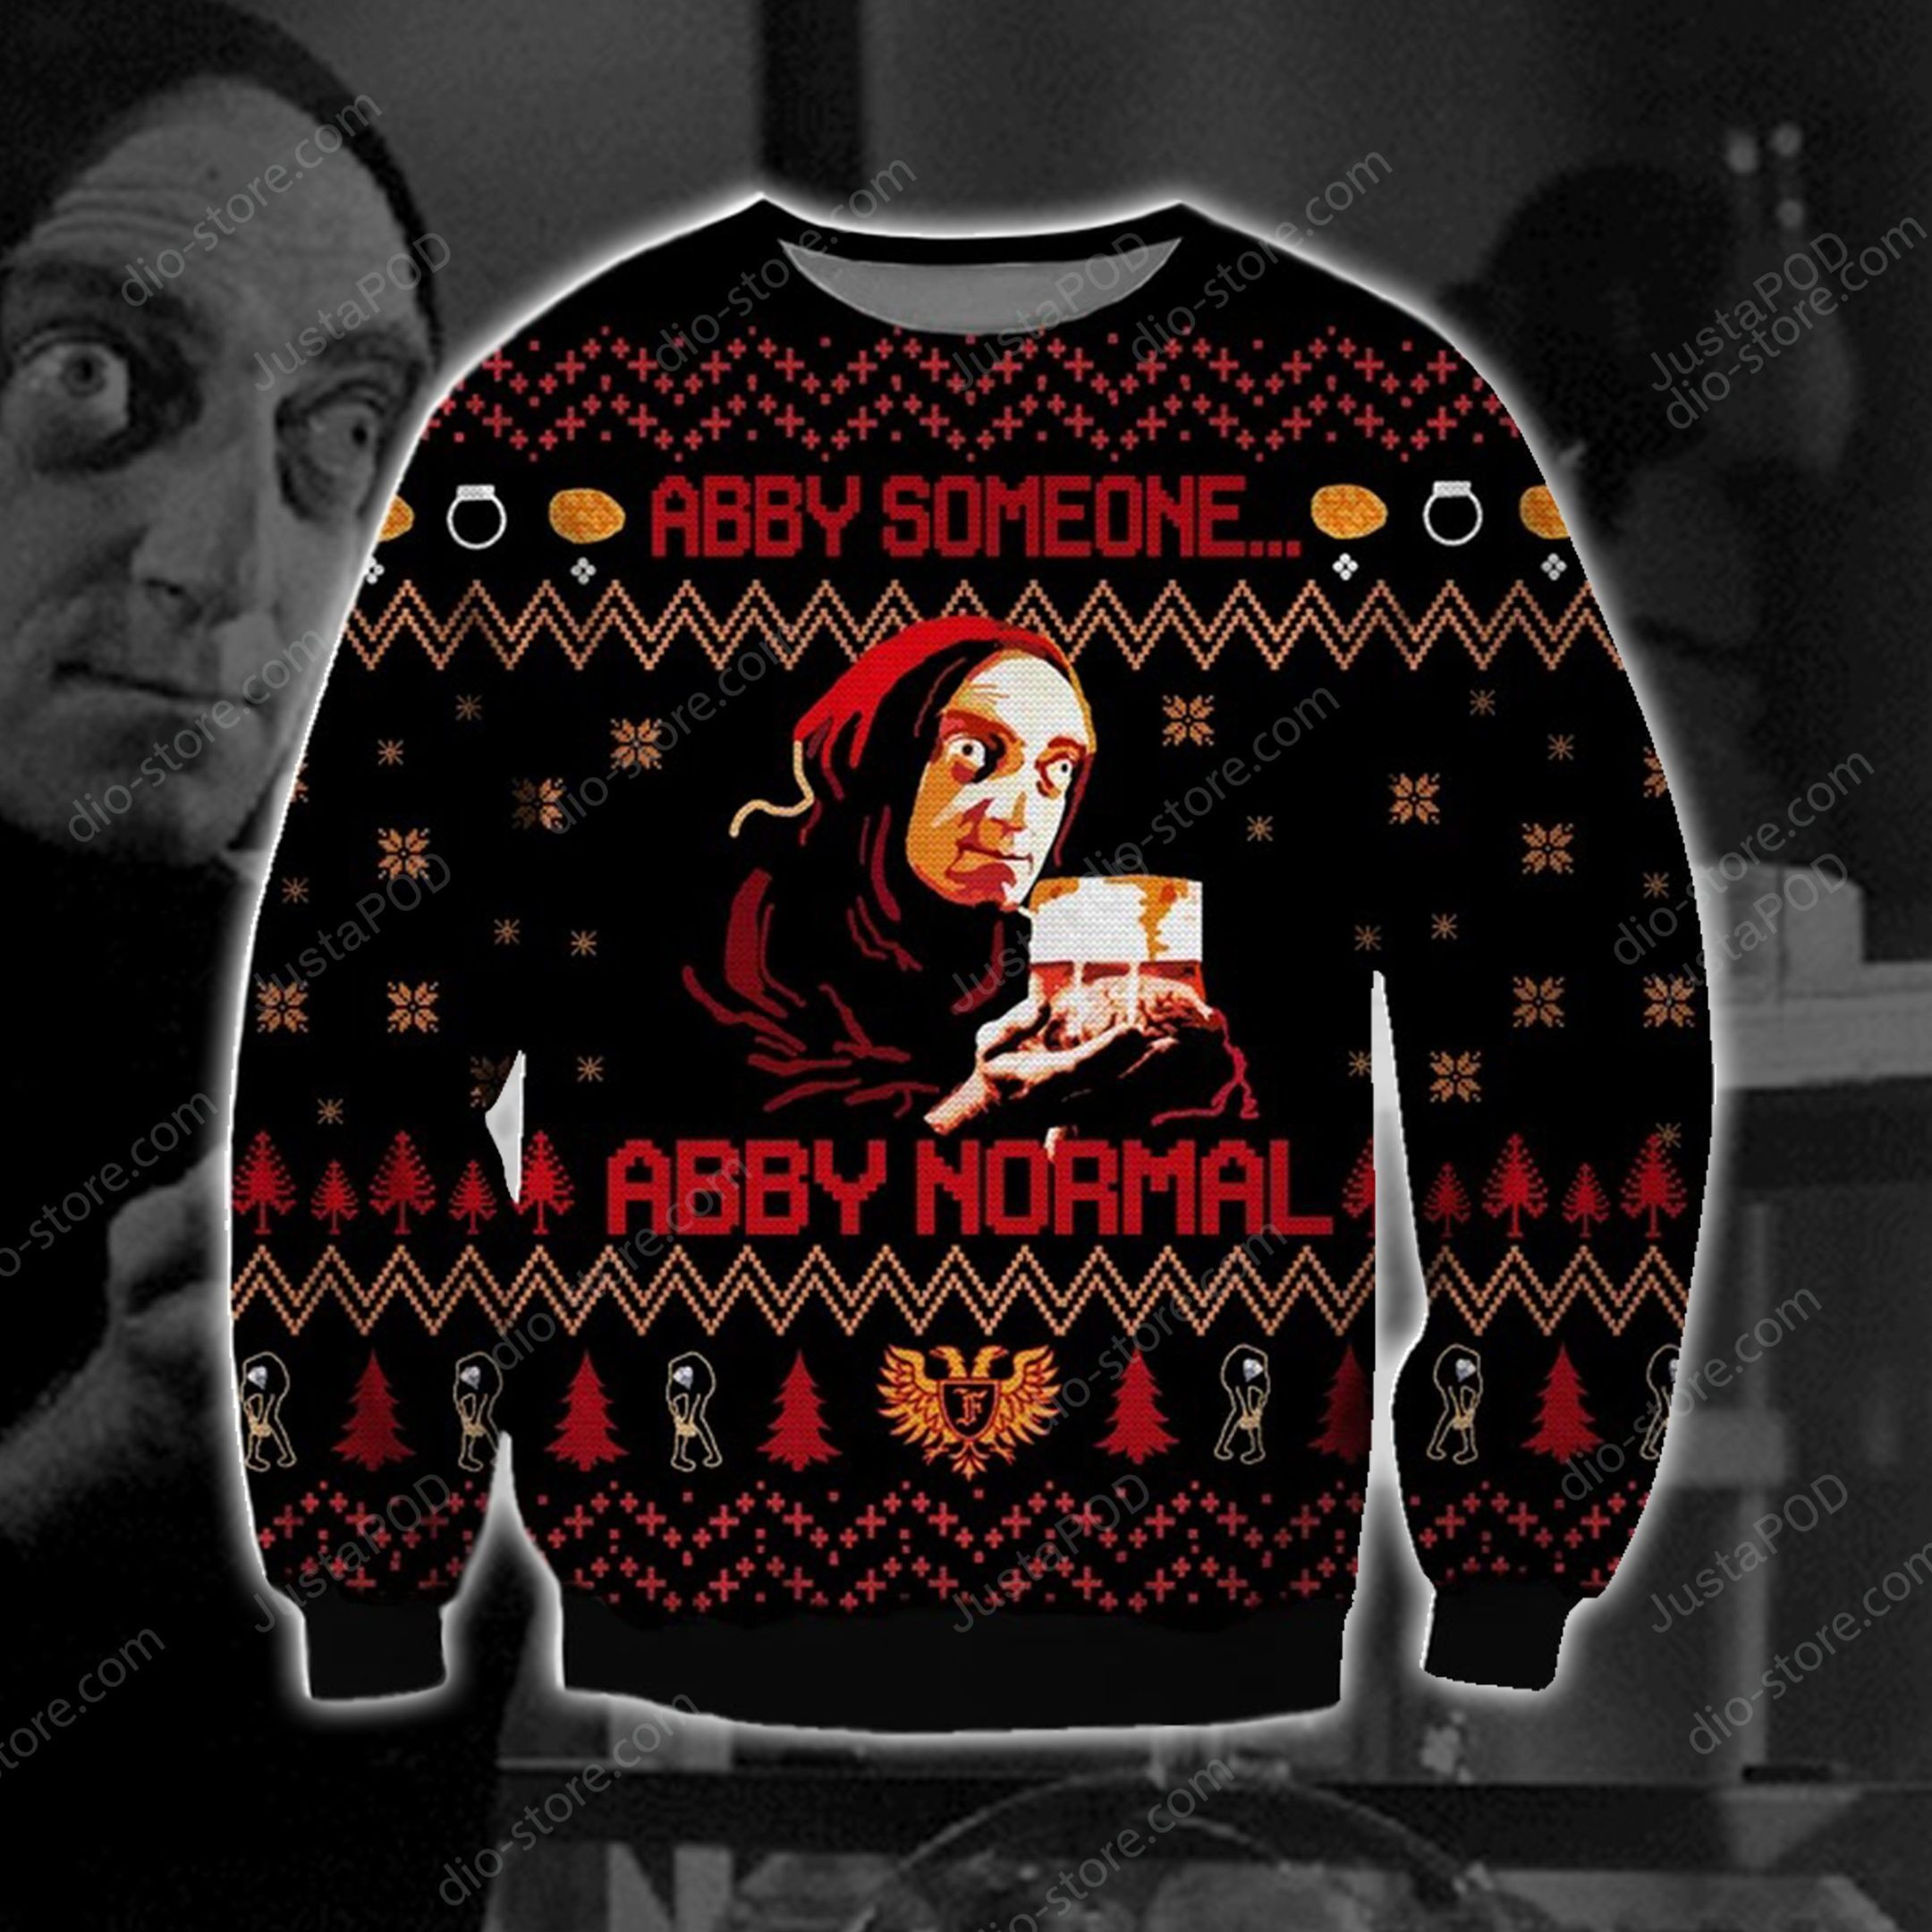 Abby Normal Ugly Sweater Ugly Sweater Christmas Sweaters Hoodie Sweater